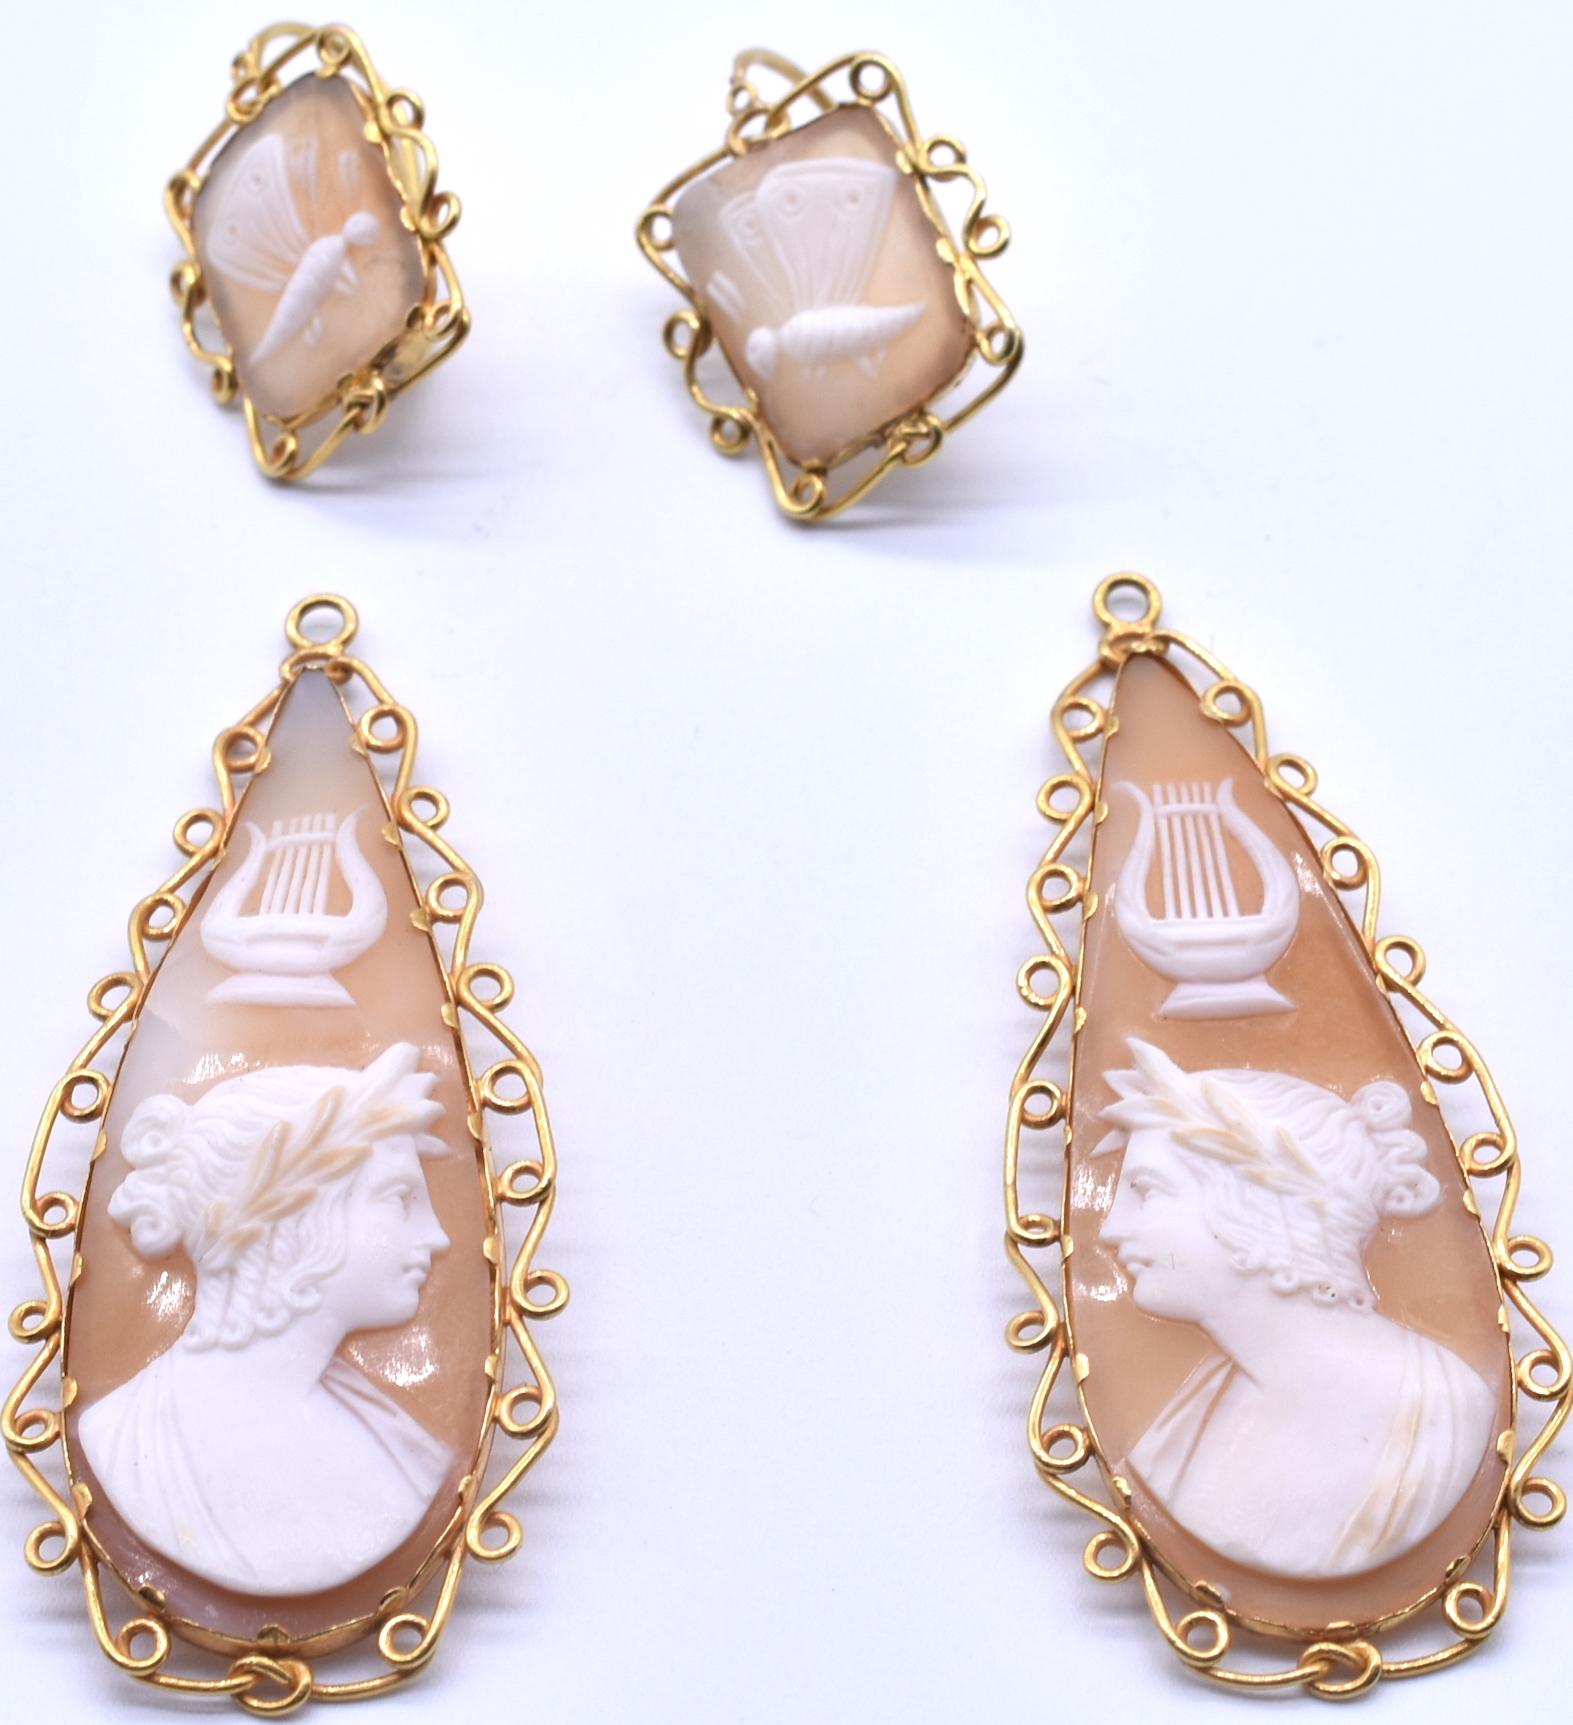 Antique Gold Cameo Shell Day Night Earrings of Apollo, c1850 1